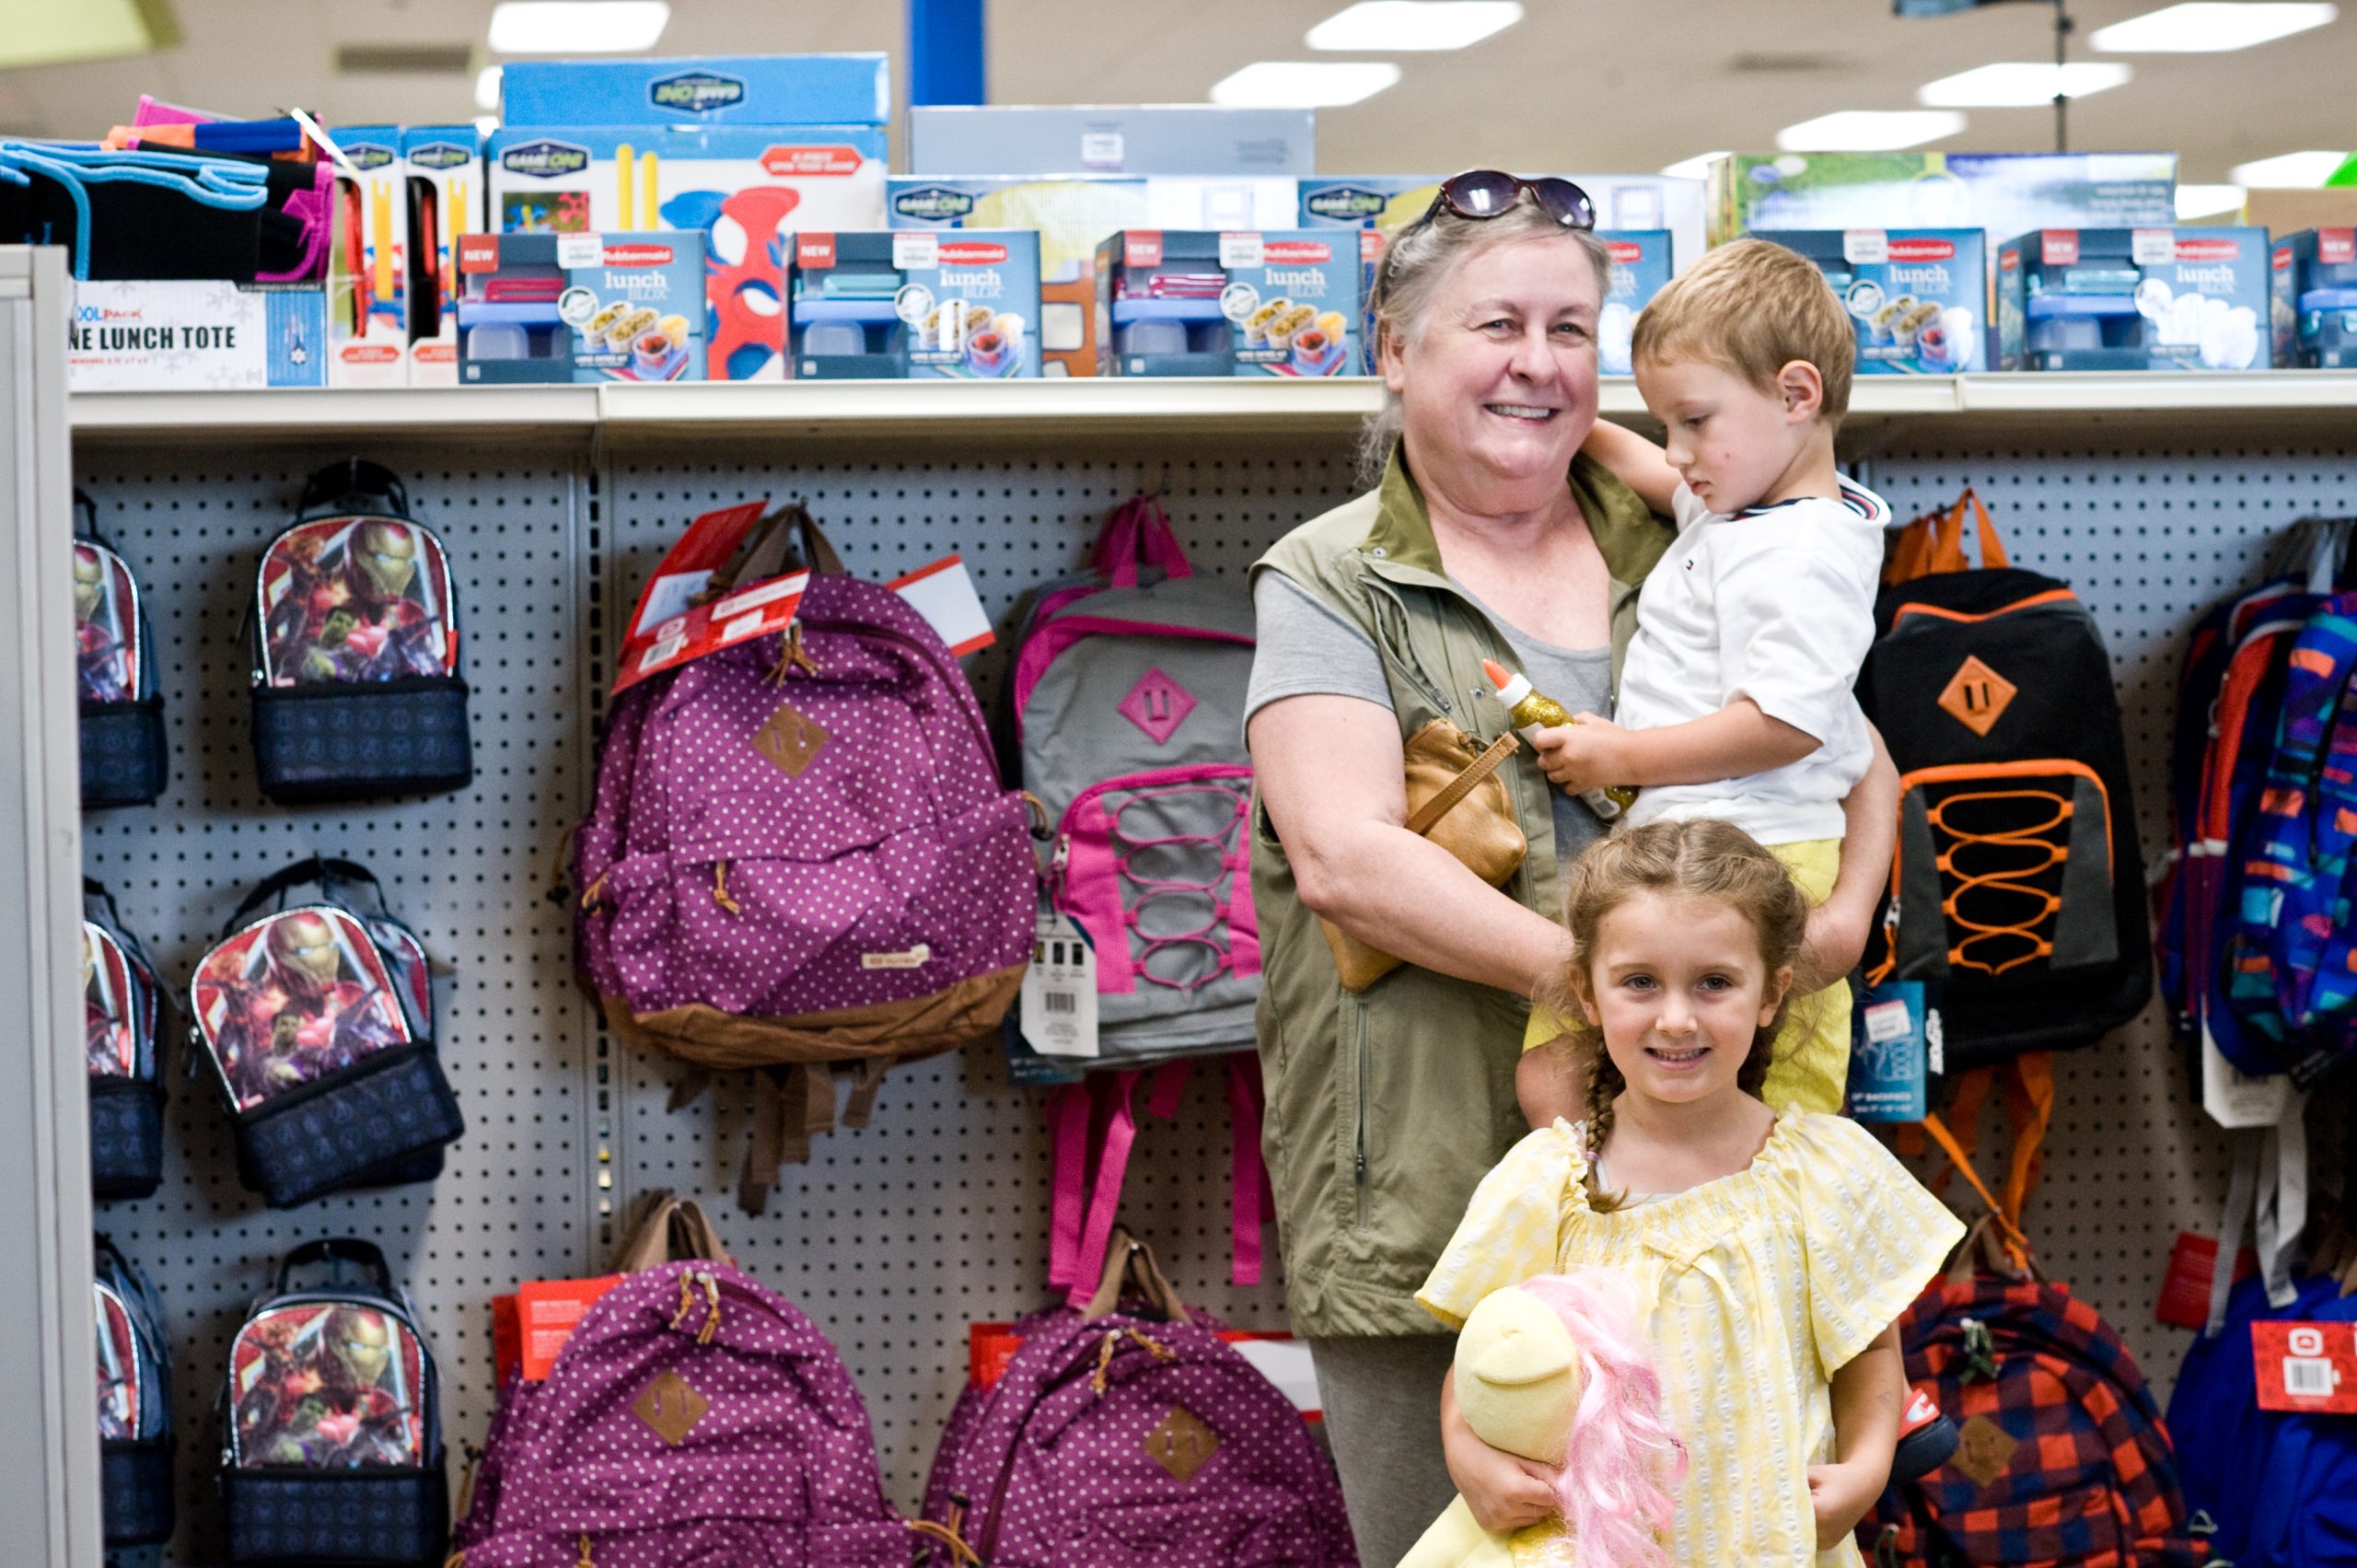 A woman stands with two young children in the backpack aisle at their local Goodwill retail store.